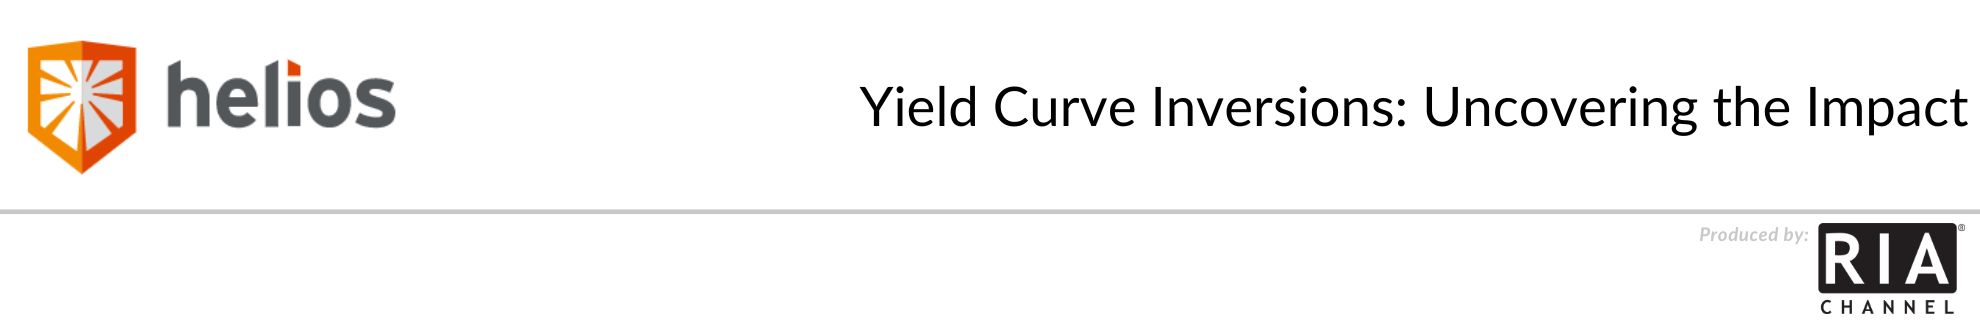 Yield Curve Inversions: Uncovering the Impact